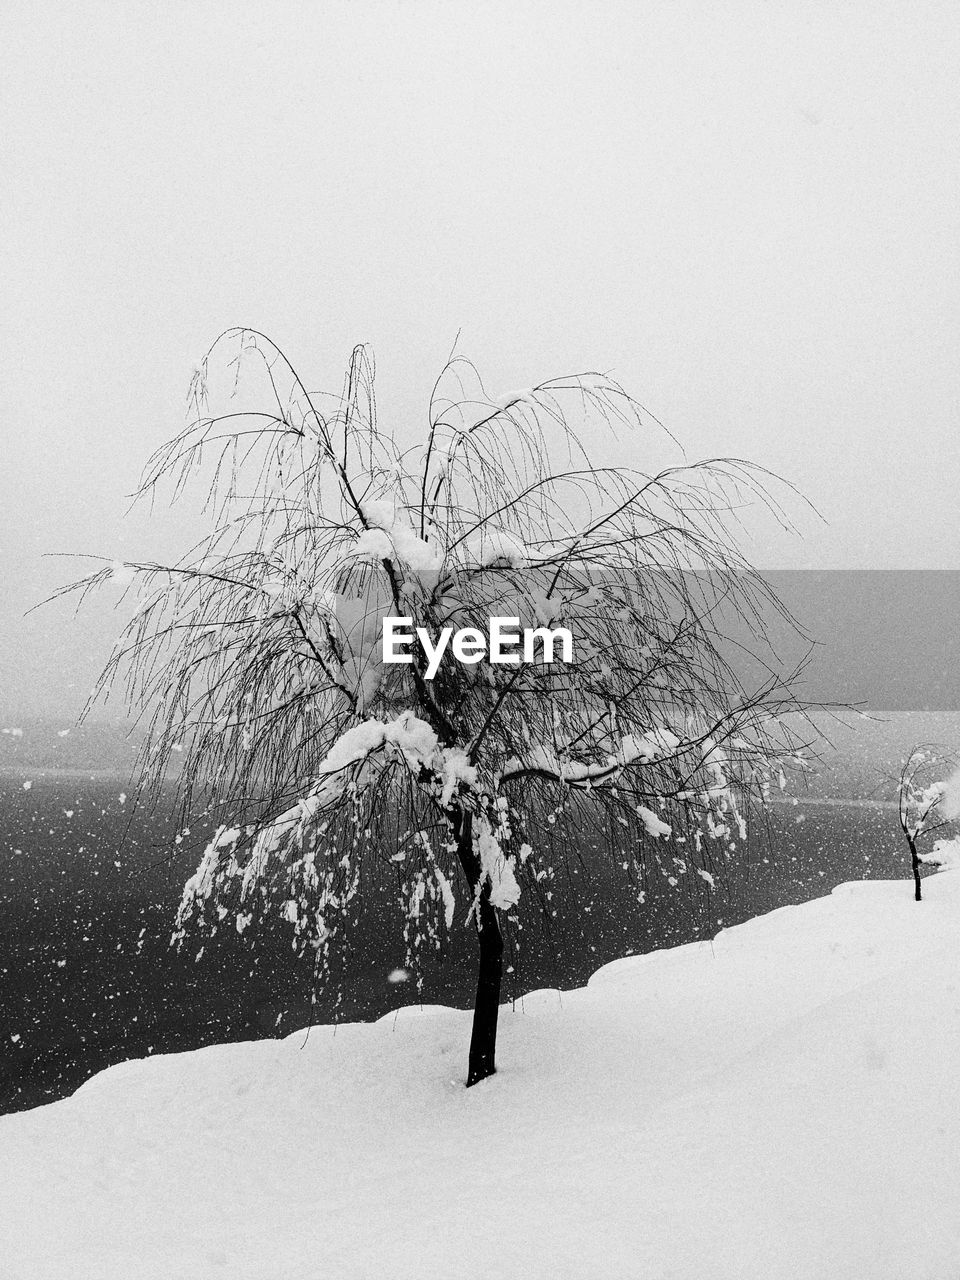 snow, winter, cold temperature, black and white, tree, nature, monochrome, plant, monochrome photography, environment, white, bare tree, fog, branch, freezing, land, landscape, beauty in nature, one person, sky, blizzard, day, outdoors, winter storm, frozen, scenics - nature, tranquility, drawing, extreme weather, snowing, non-urban scene, mountain, deep snow, full length, adult